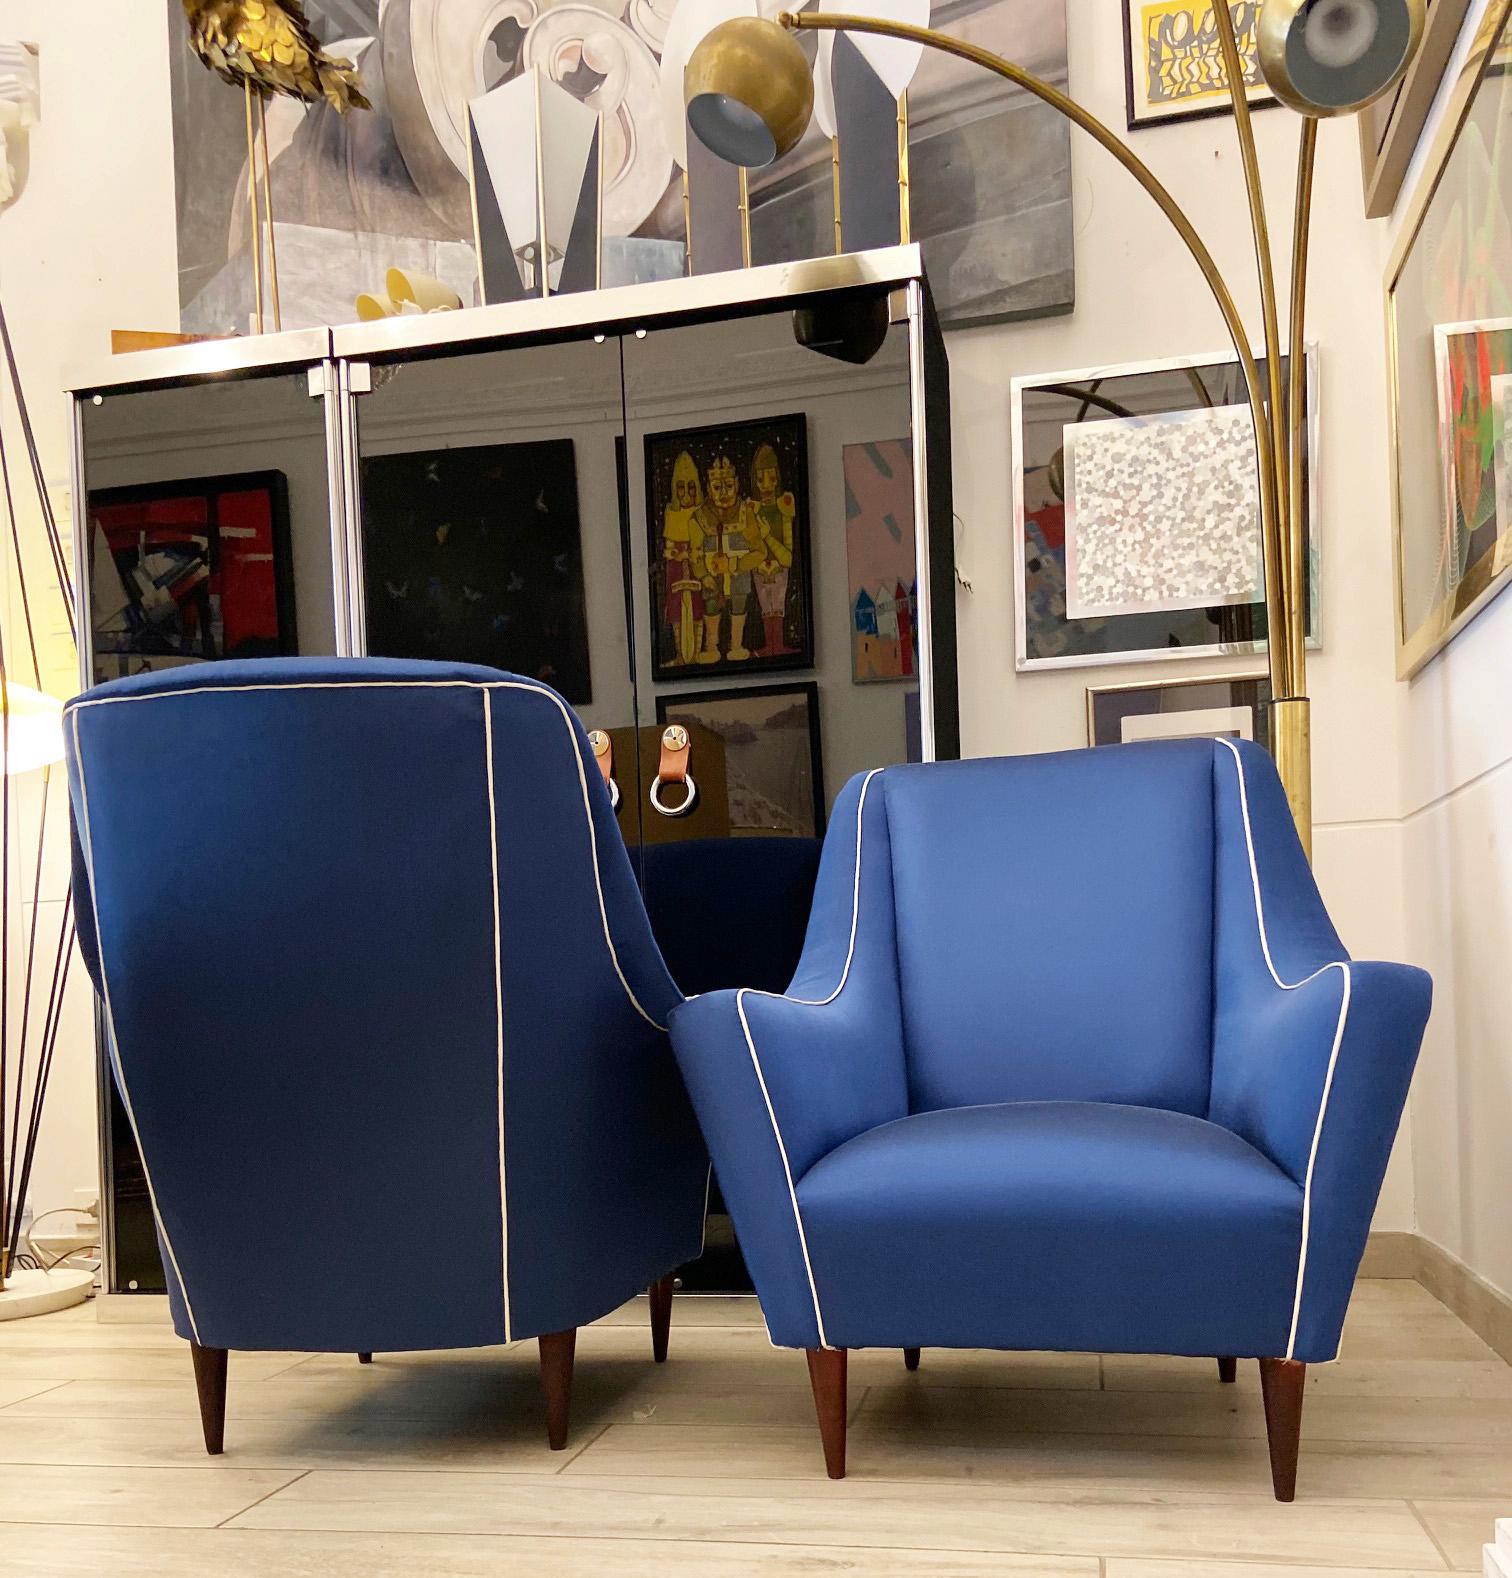 Mid-20th Century Midcentury Lounge Chairs Attributed to Ico Luisa Parisi for Ariberto Colombo